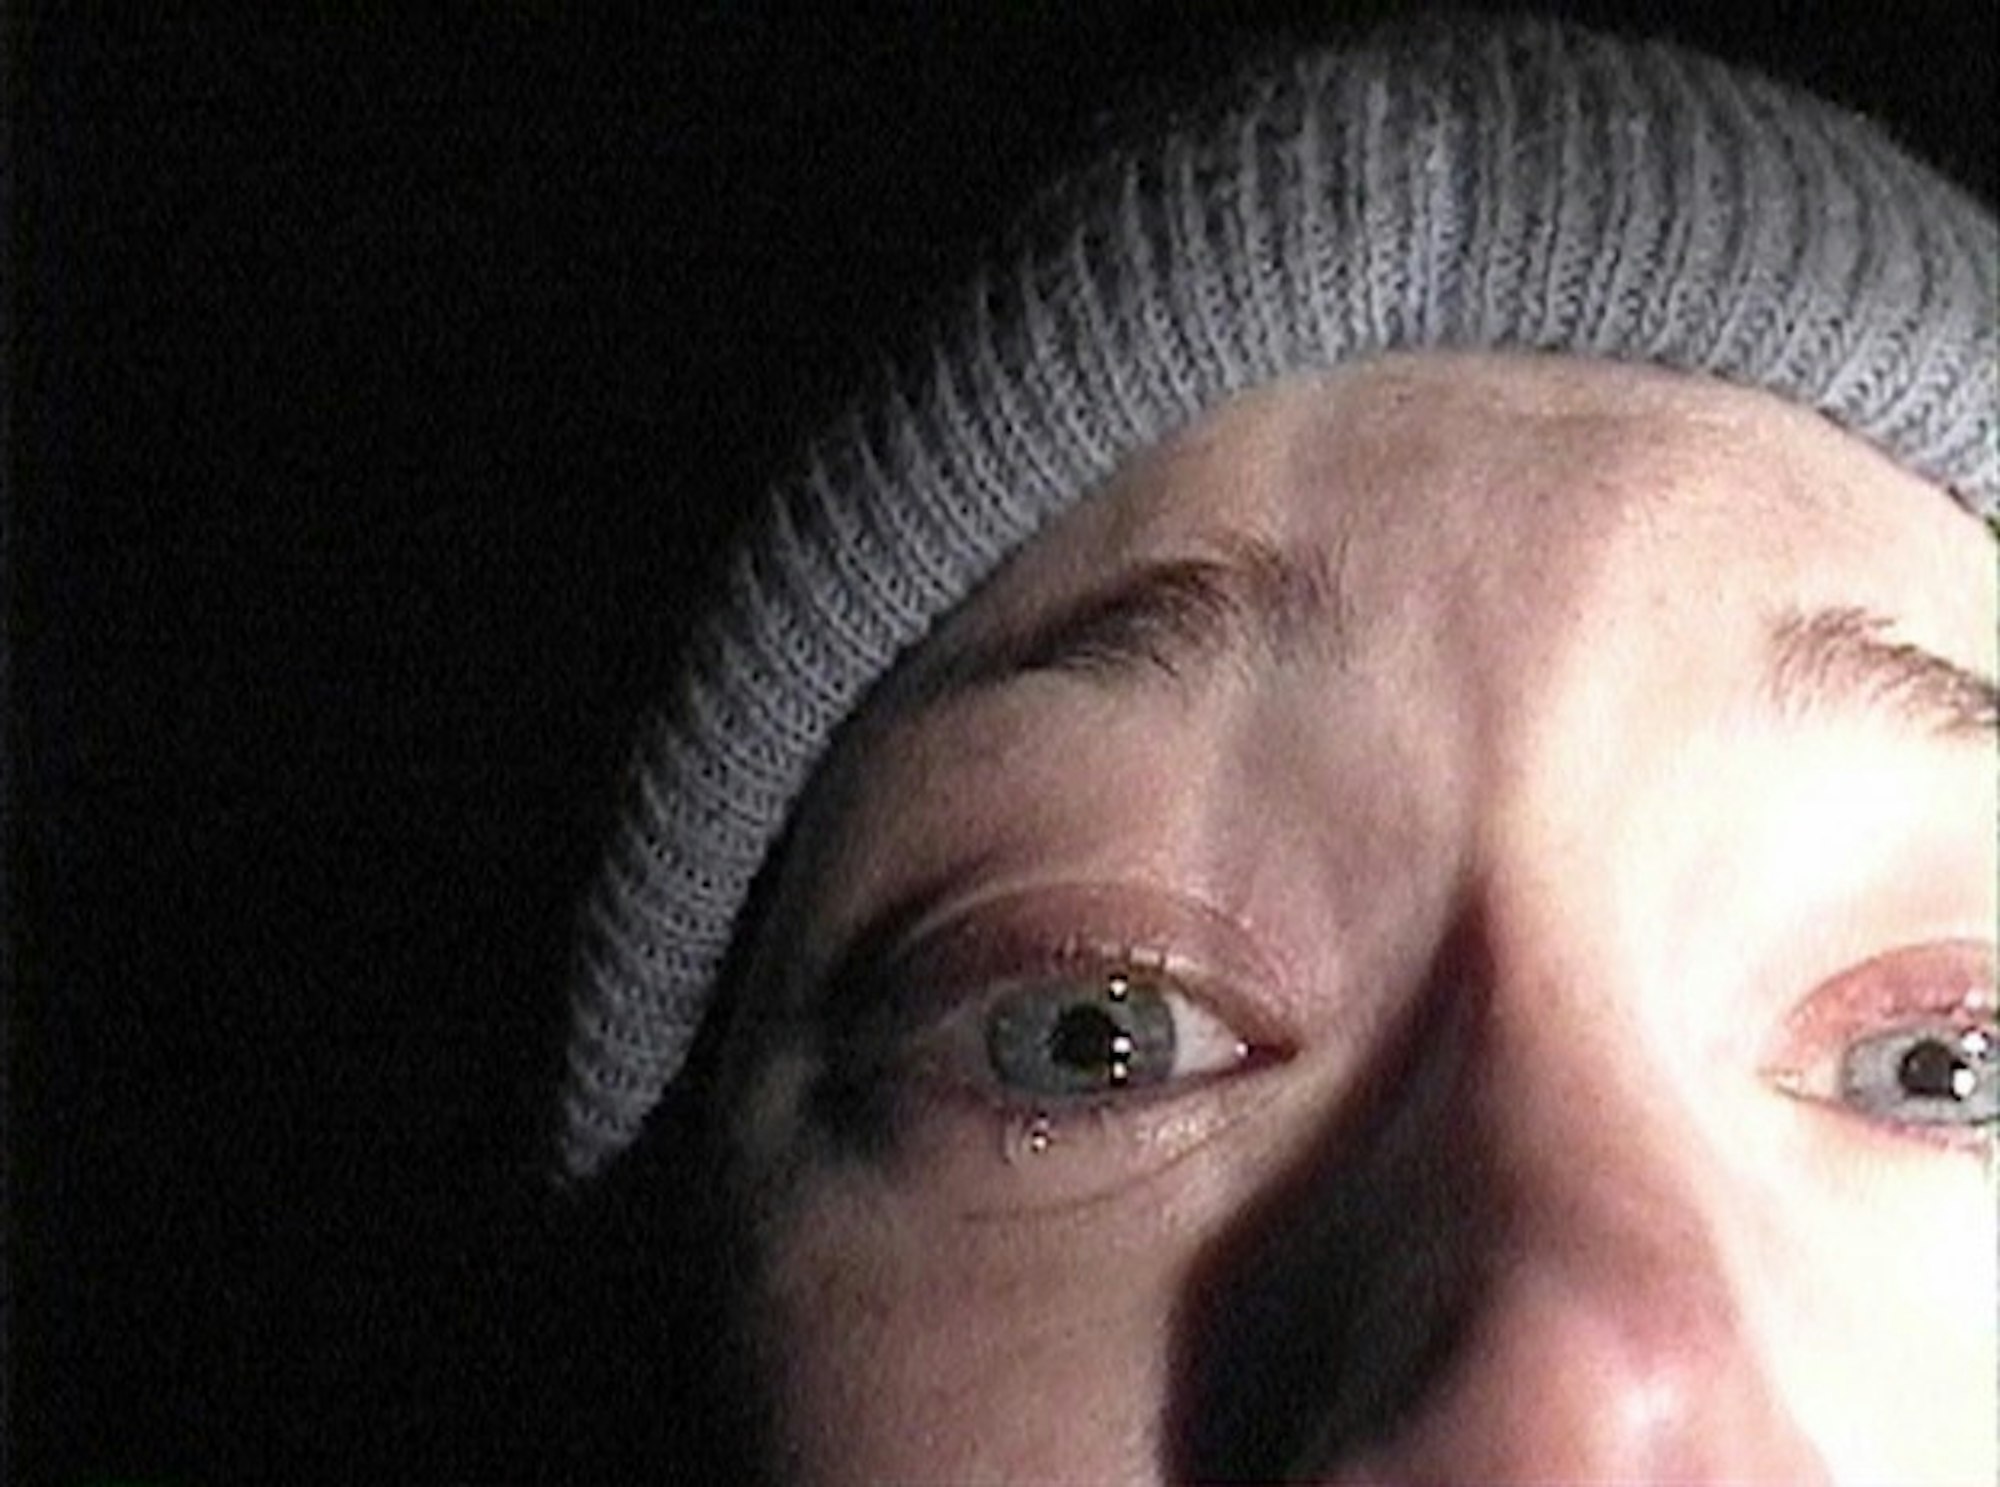 Blair Witch Project